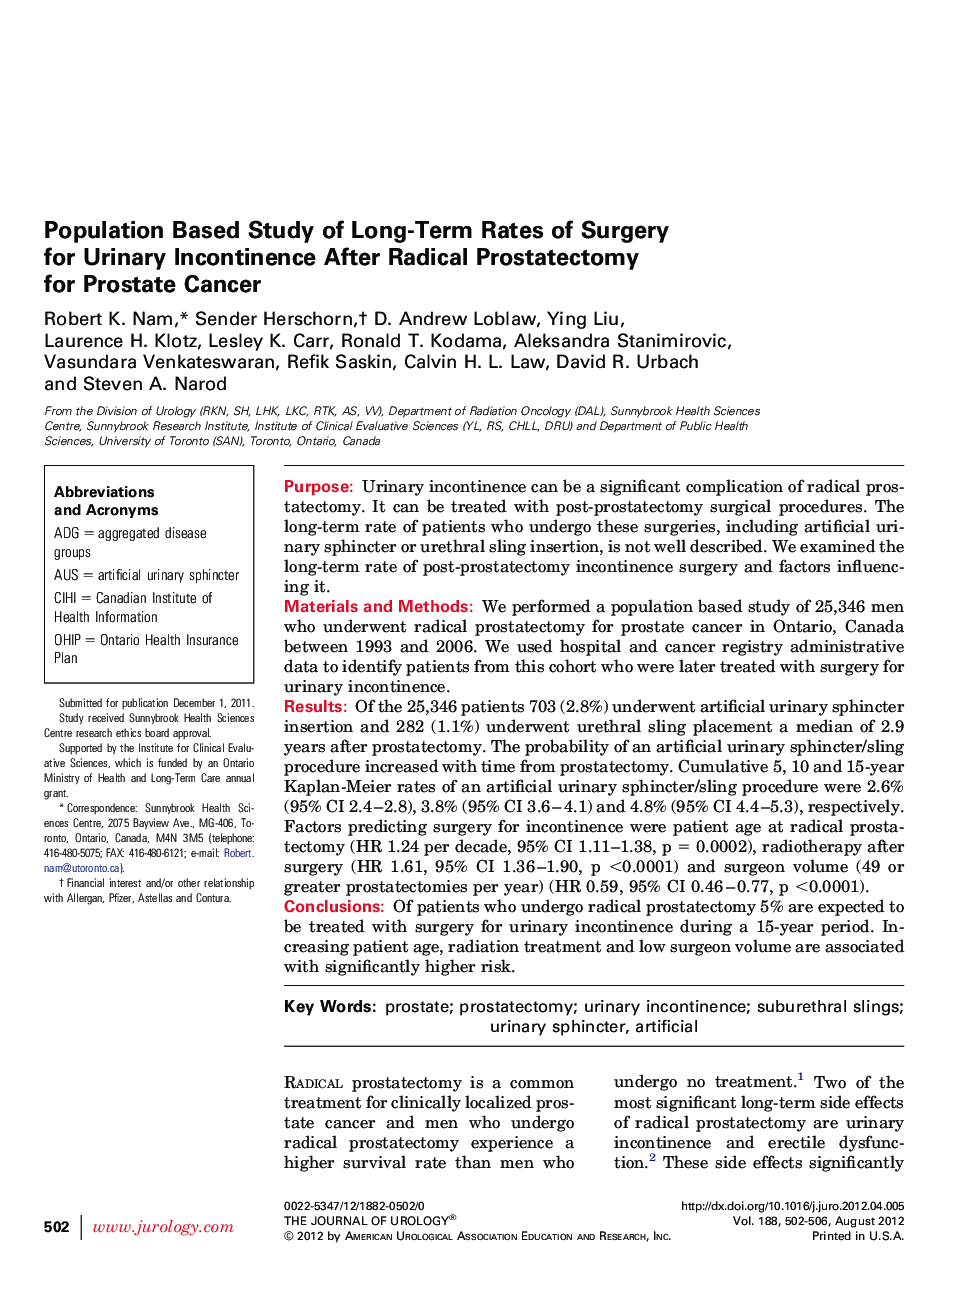 Population Based Study of Long-Term Rates of Surgery for Urinary Incontinence After Radical Prostatectomy for Prostate Cancer 